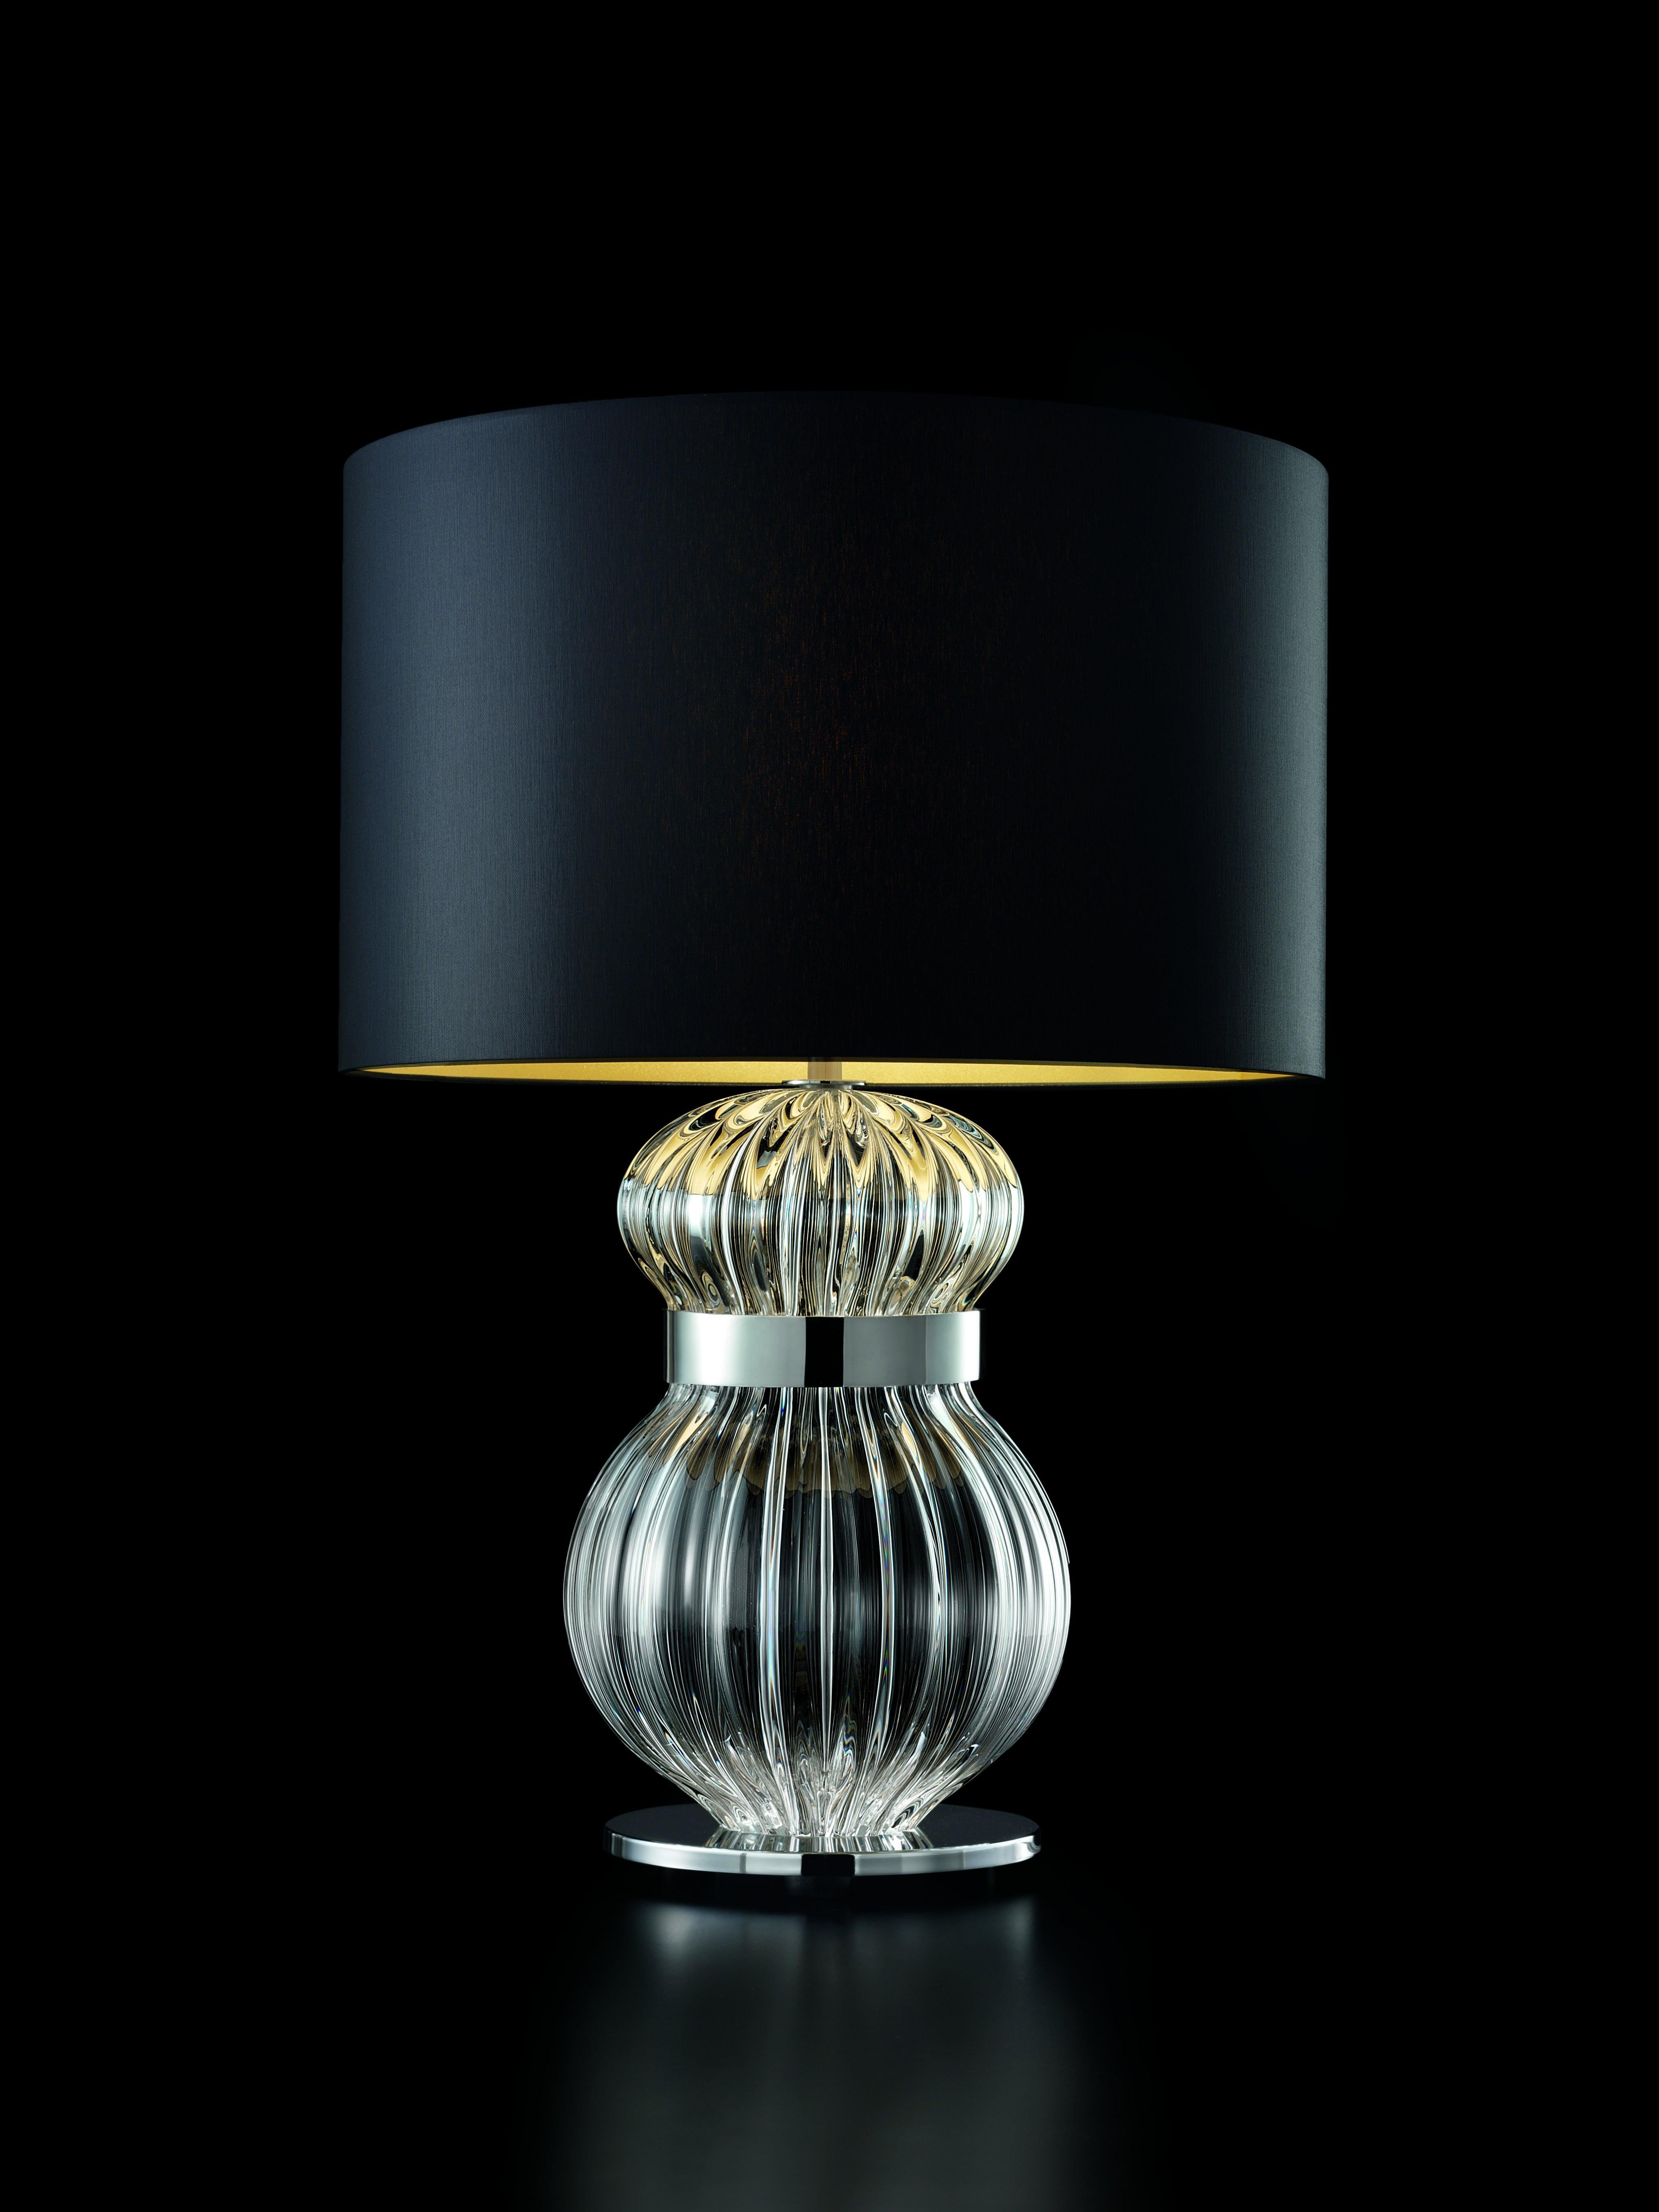 Contemporary Medina 5686 Table Lamp in Glass with Black/Gold Shade by, Barovier&Toso